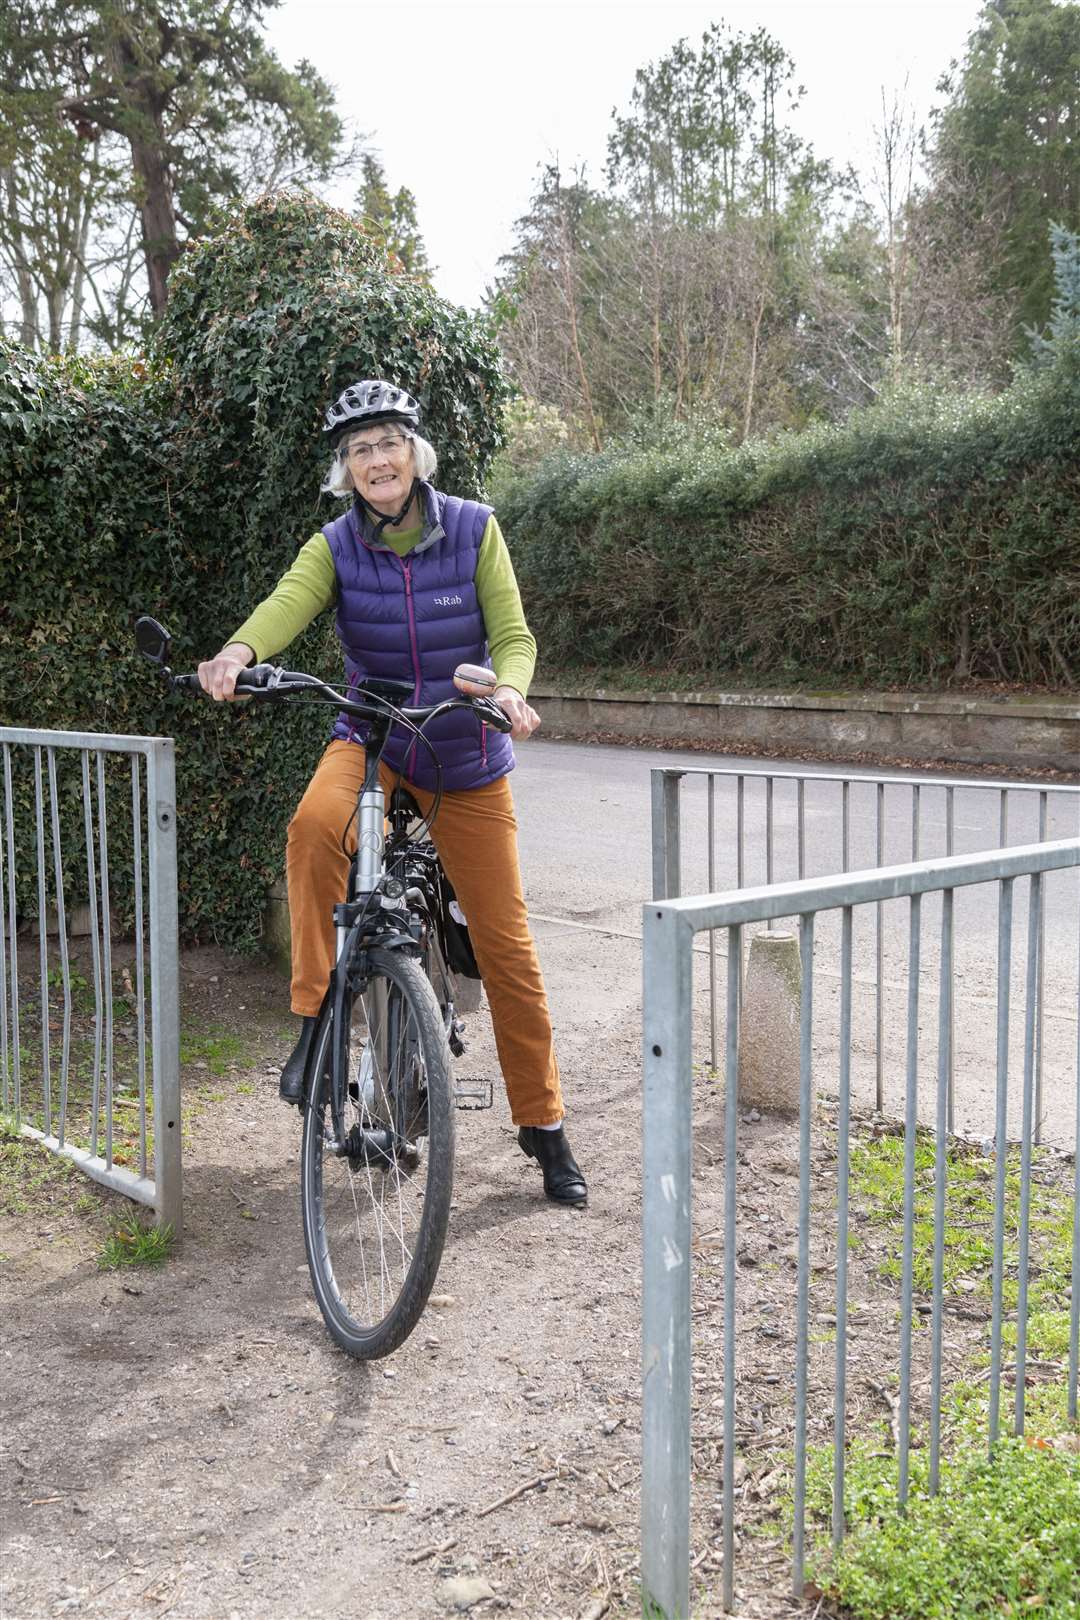 Active Travel Forres leader, Judith Binney, is highlighting areas of Forres that need to be upgraded for cyclists and pedestrians. Picture: Beth Taylor